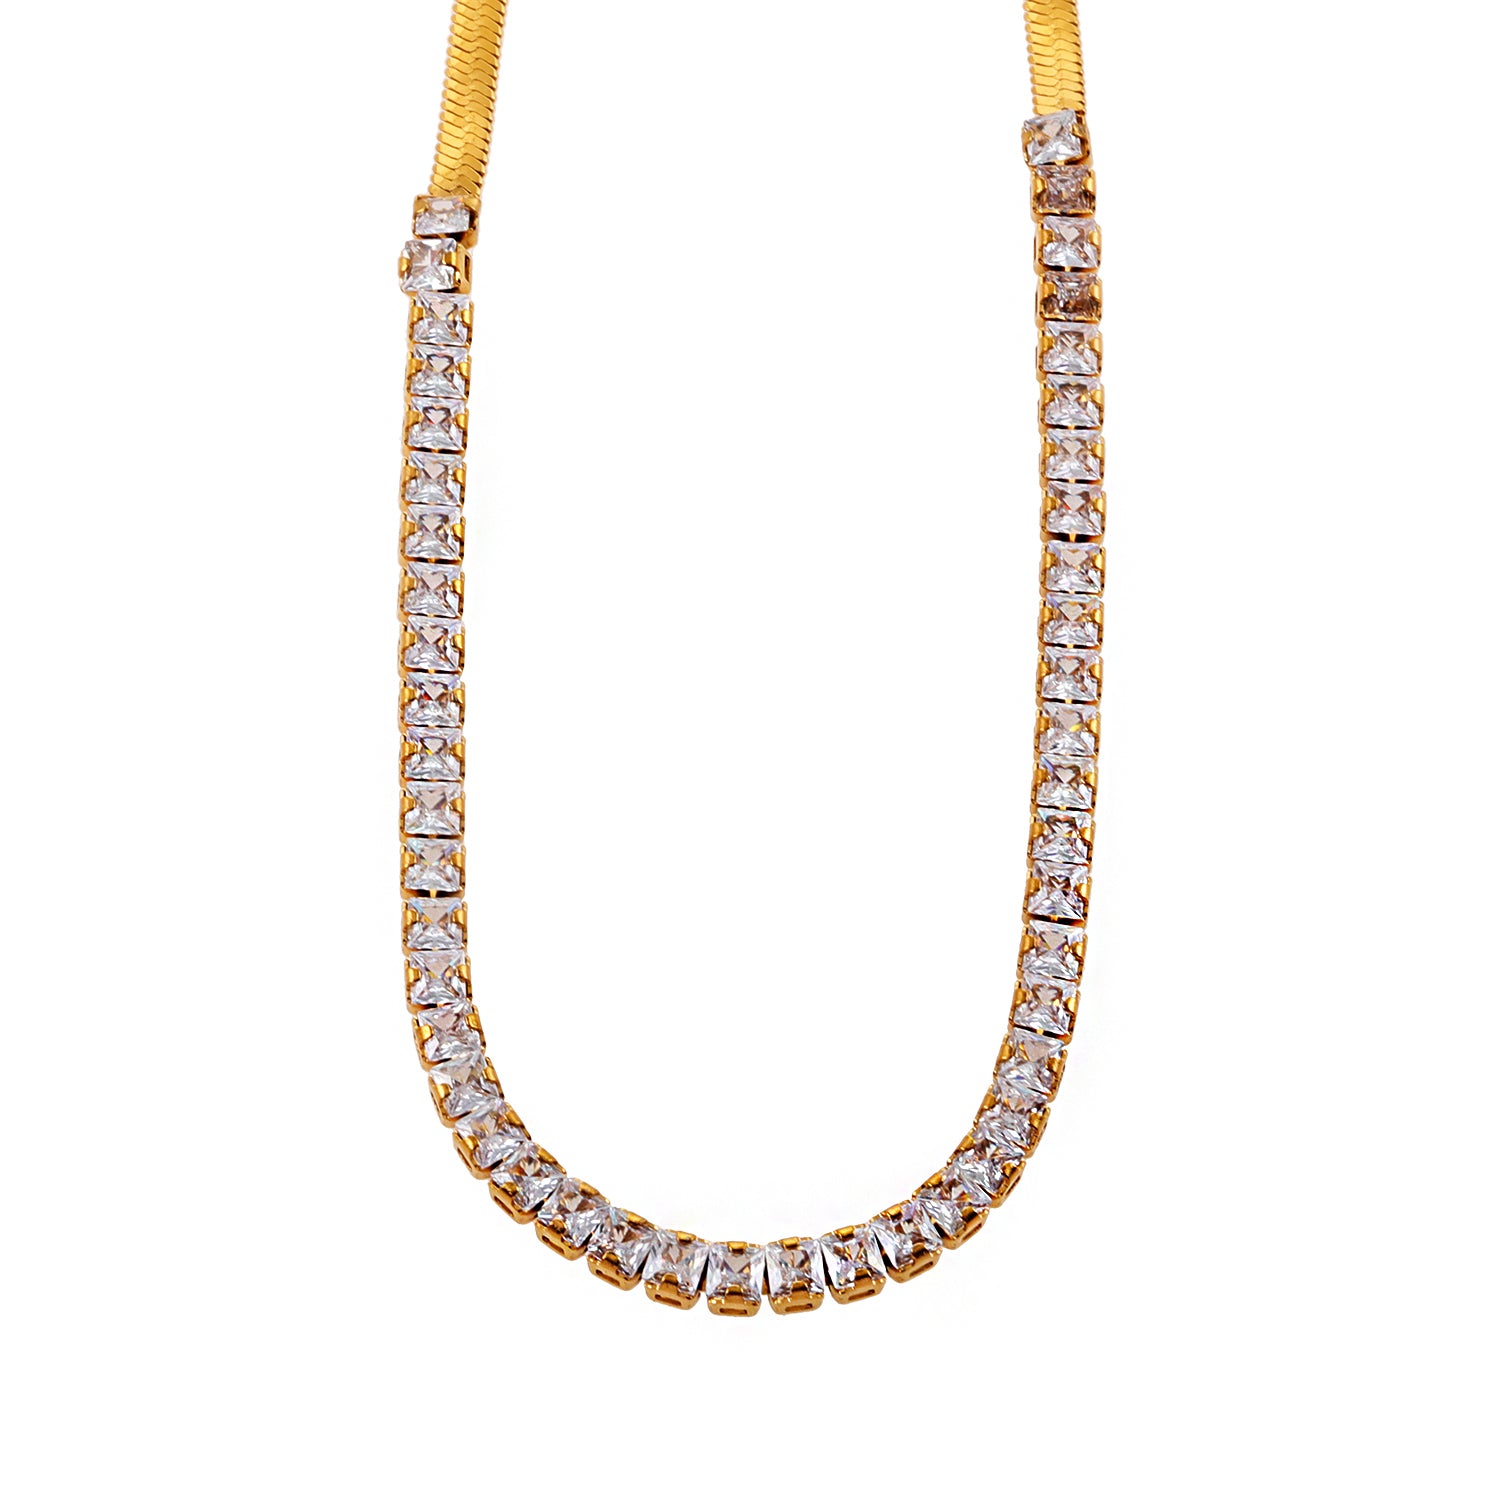 Style MESTIA 88393: Combo Necklace with Snake-Skin Textured & Tennis Chains.